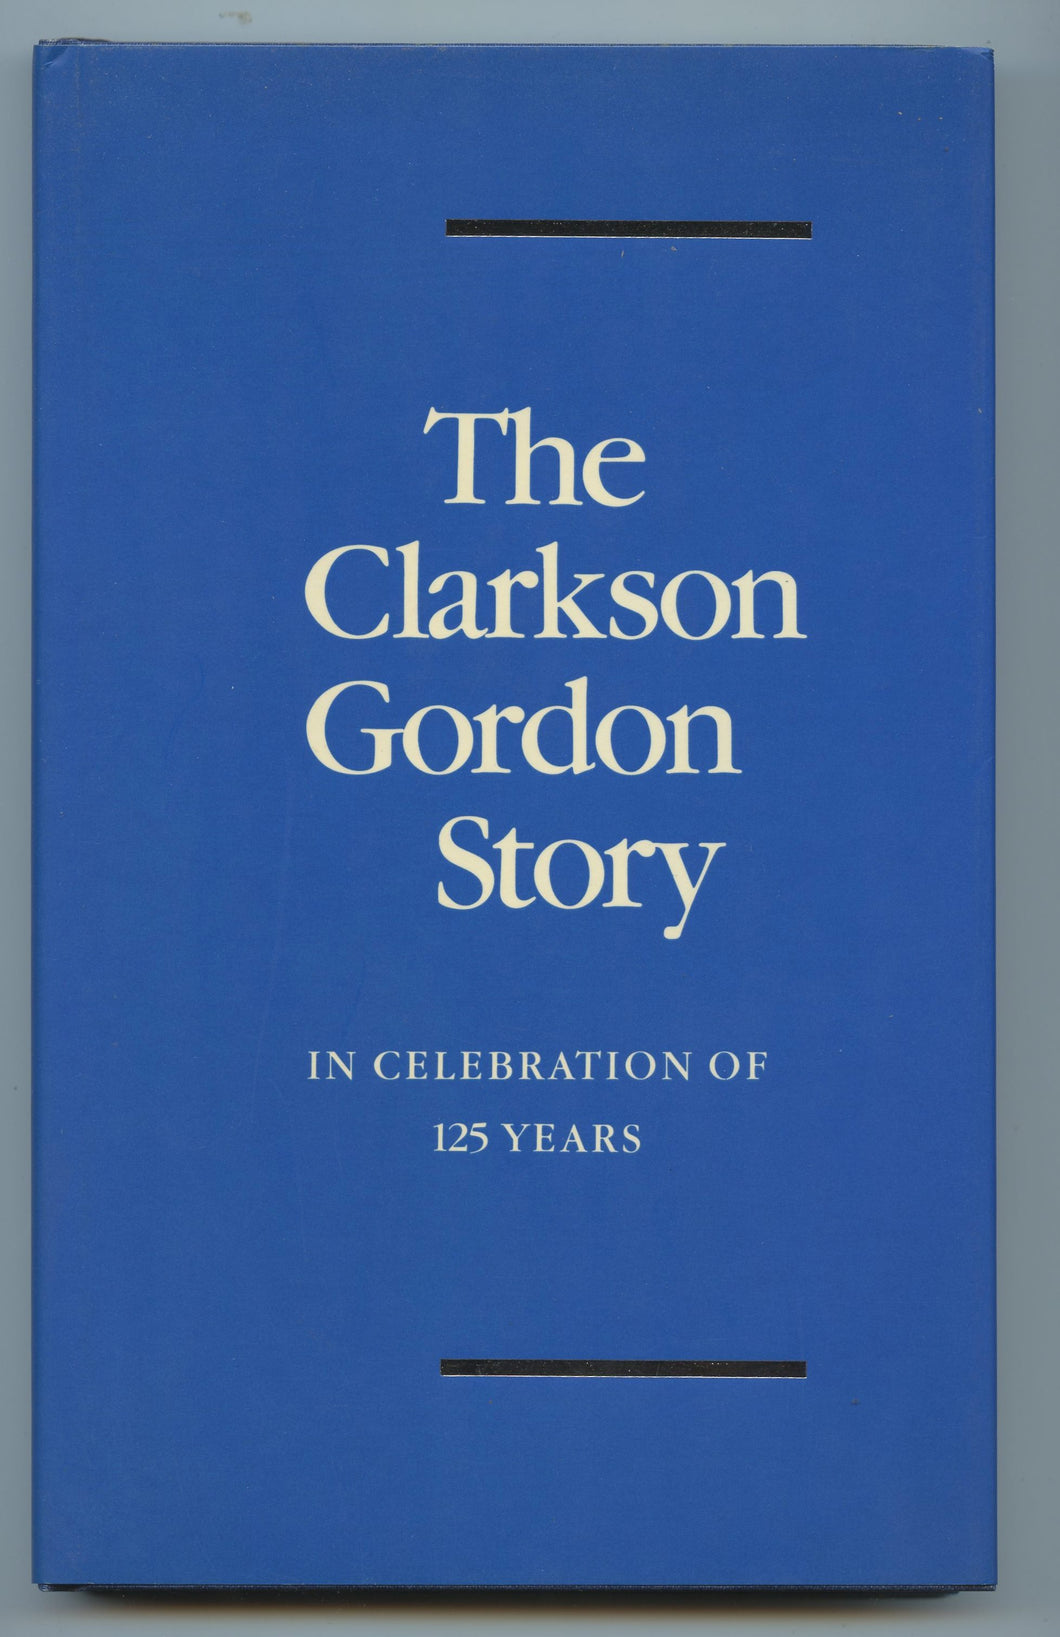 The Clarkson Gordon Story: In Celebration of 125 Years